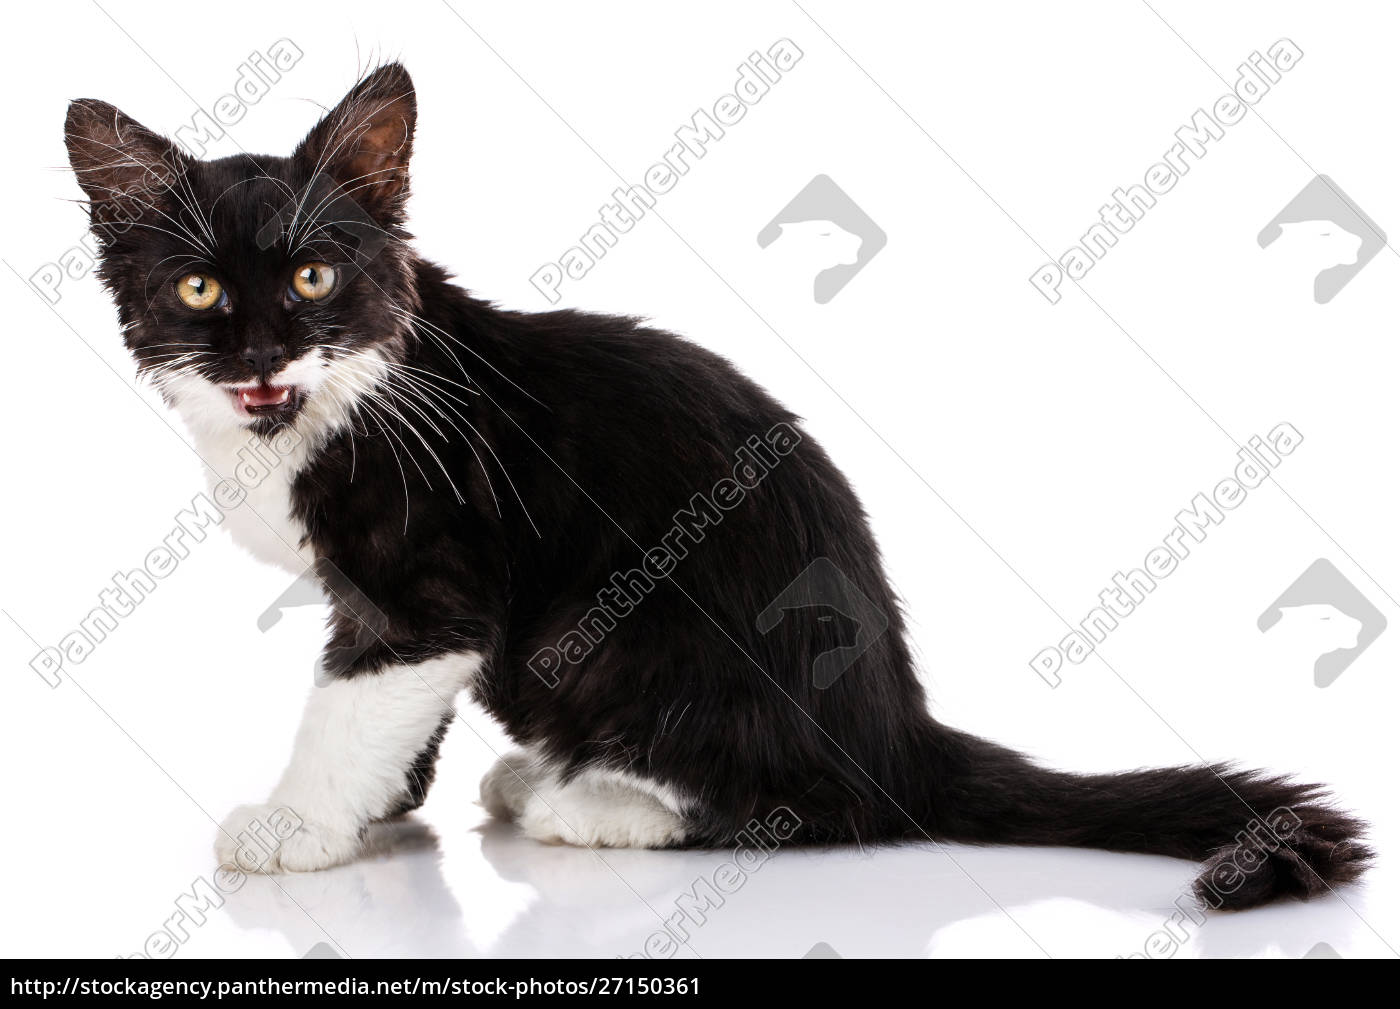 Black And White Kitten Isolated On White Background Stock Photo 27150361 Panthermedia Stock Agency,Anniversary Ideas